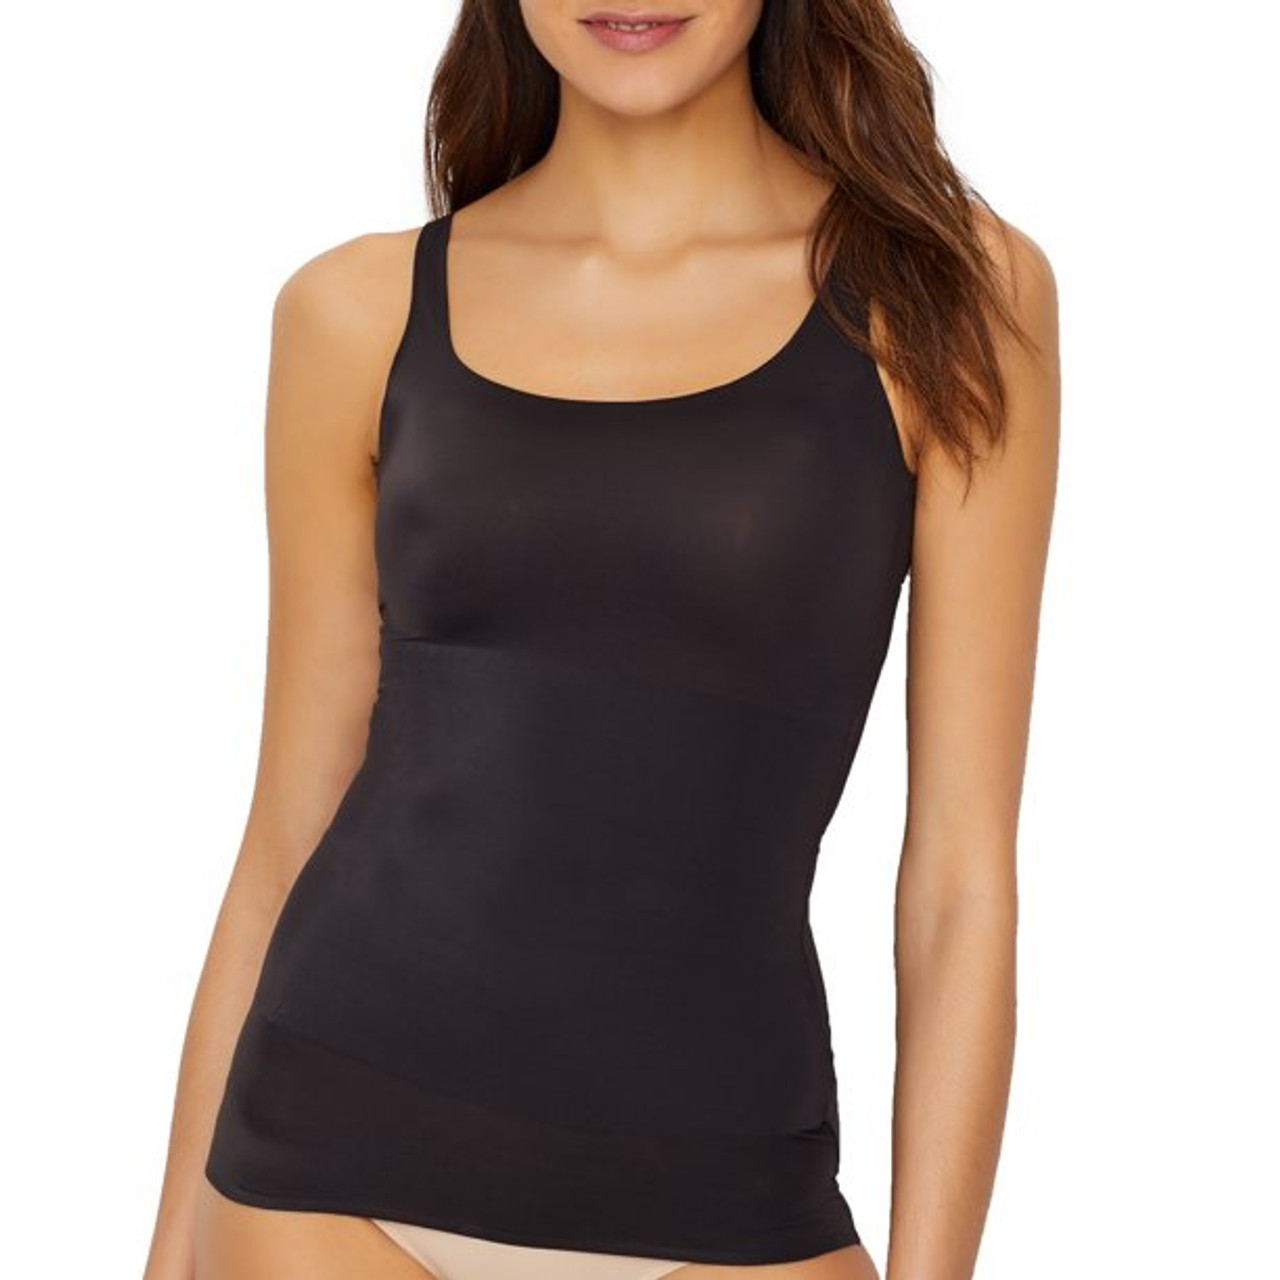 TC Fine Intimates No “Side-Show” Shape Camisole in Black FINAL SALE  NORMALLY $42